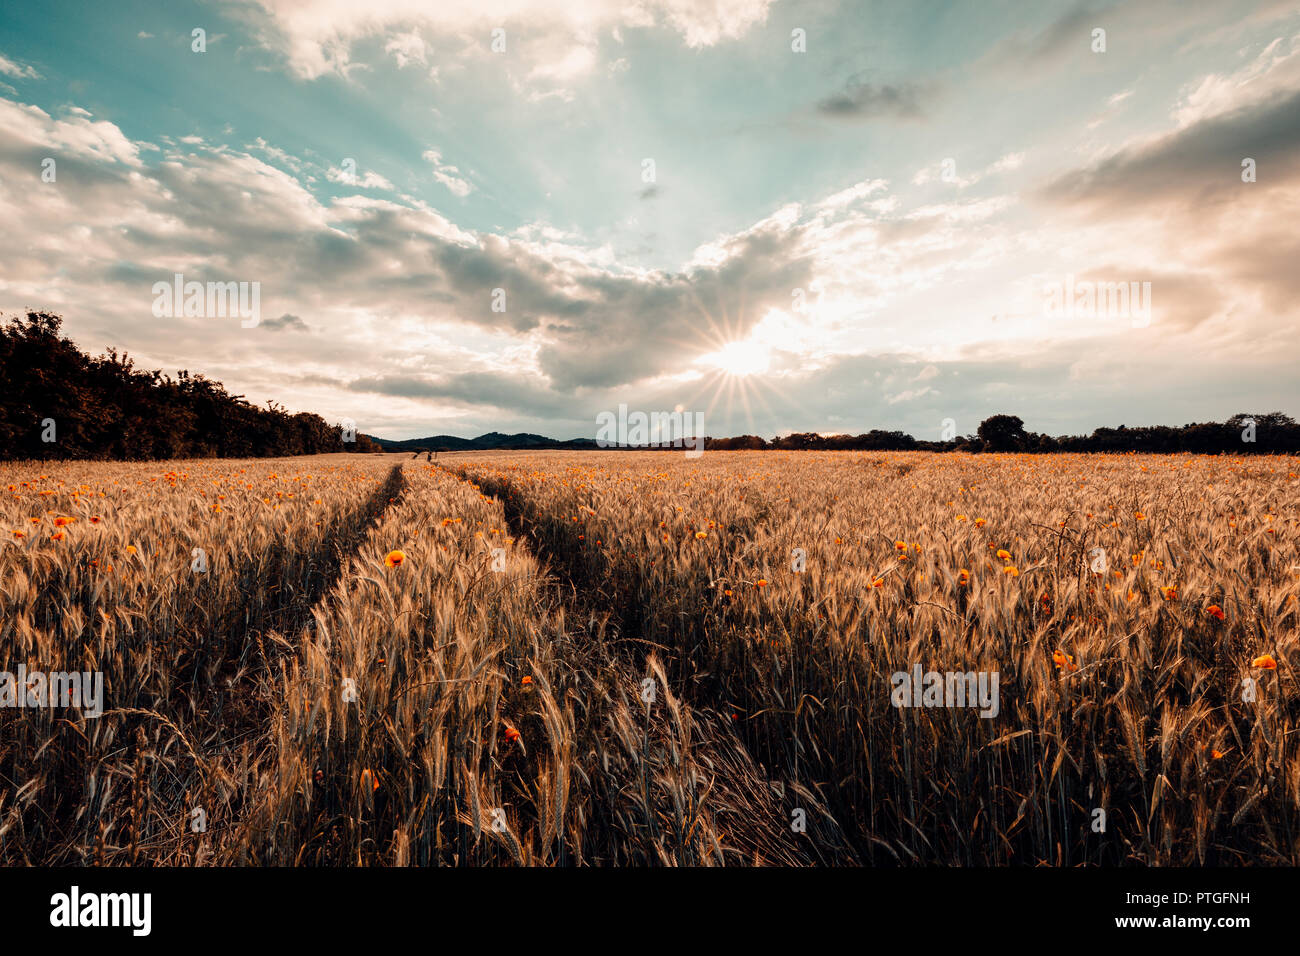 Large cornfield with clouds in the sky. Tracks lead through the field Stock Photo